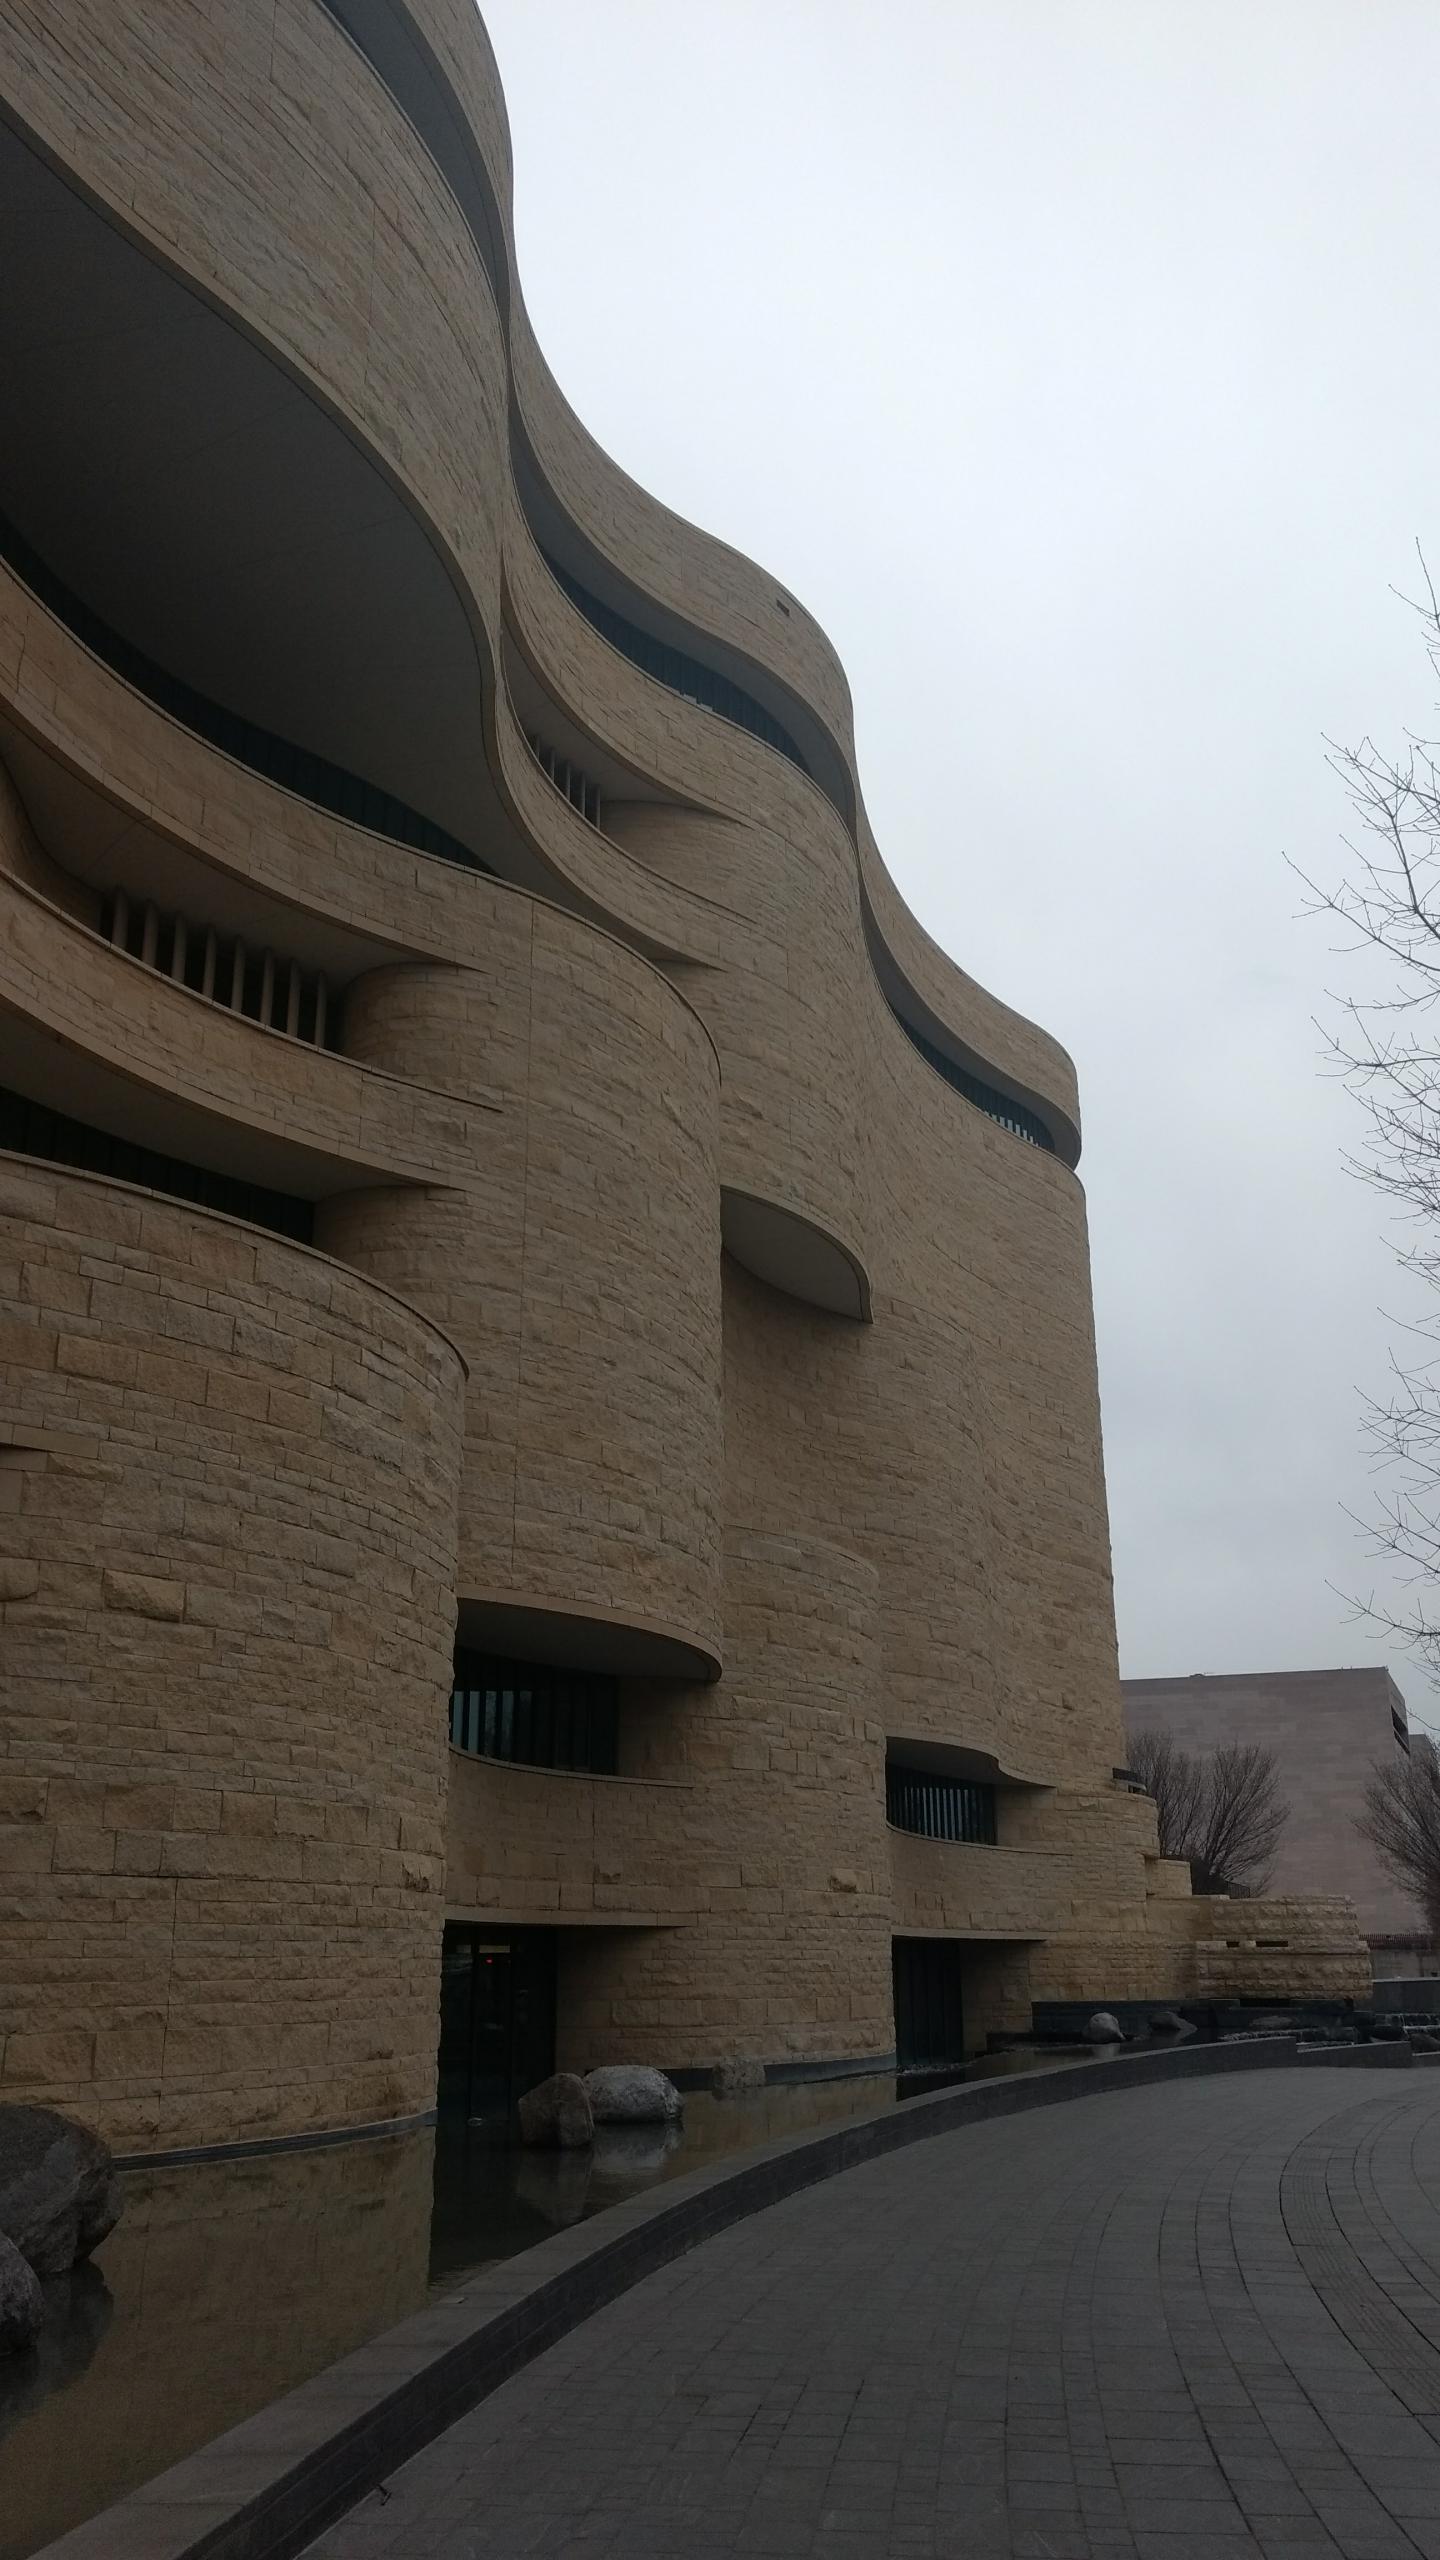 The Smithsonian National Museum of the American Indian